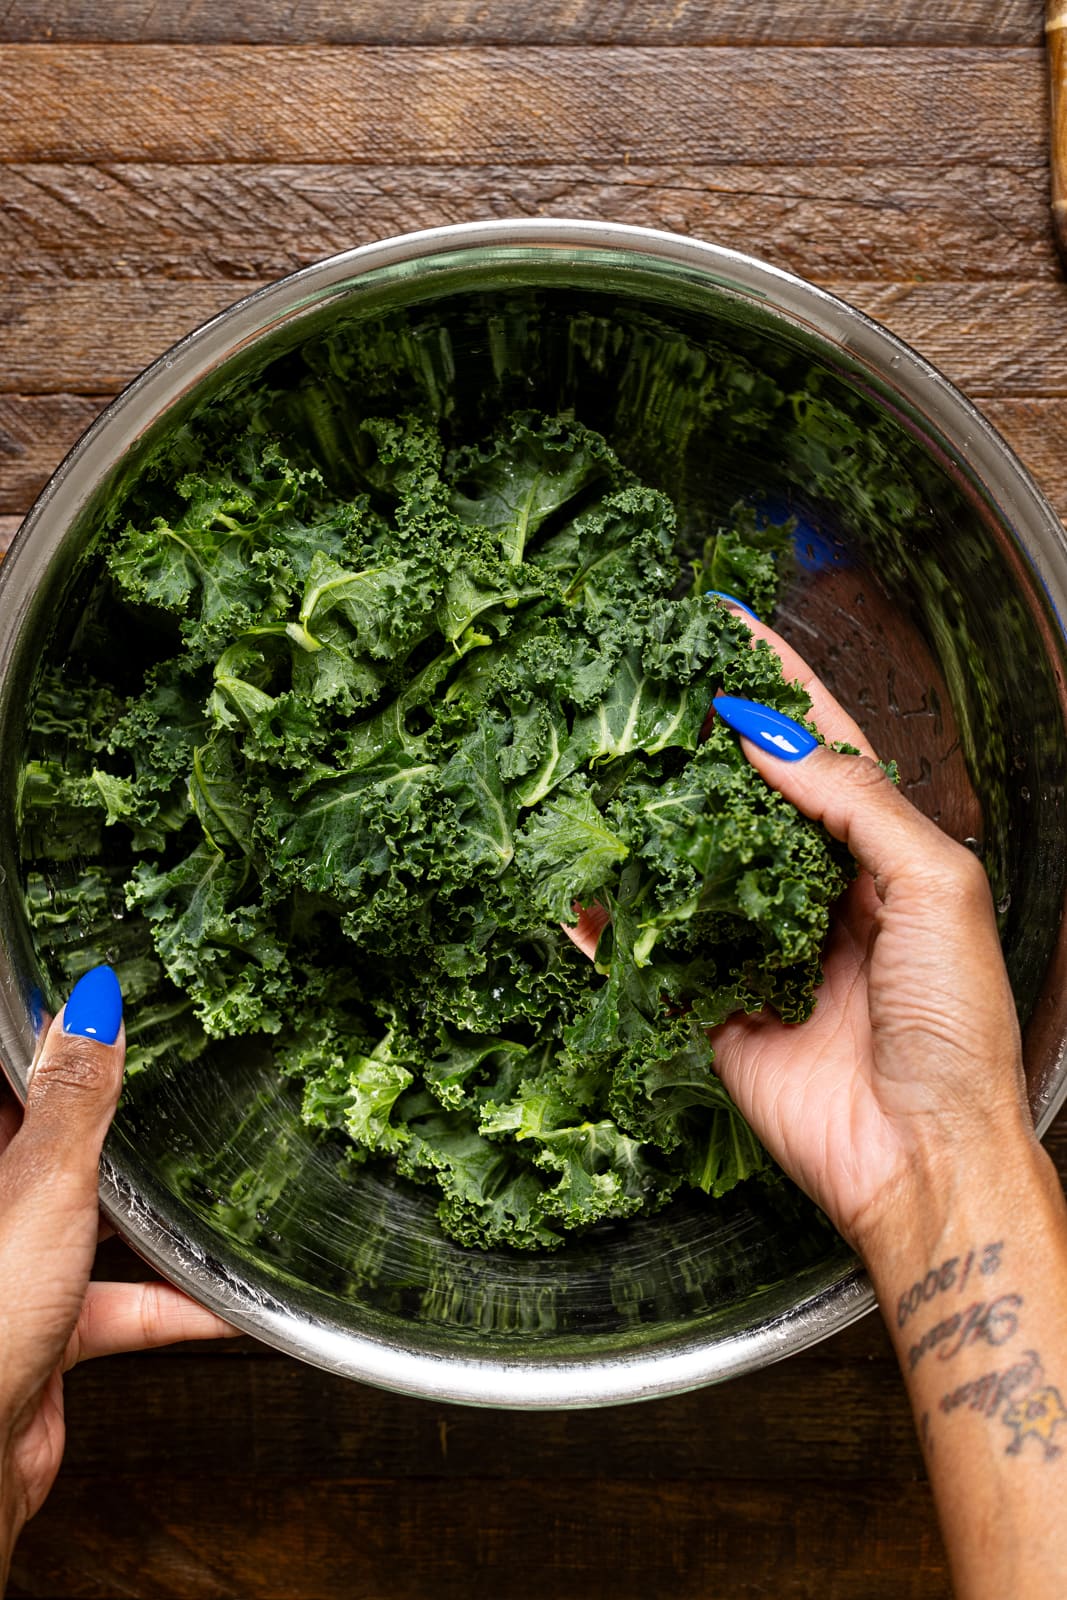 Fresh kale being held in a silver bowl.